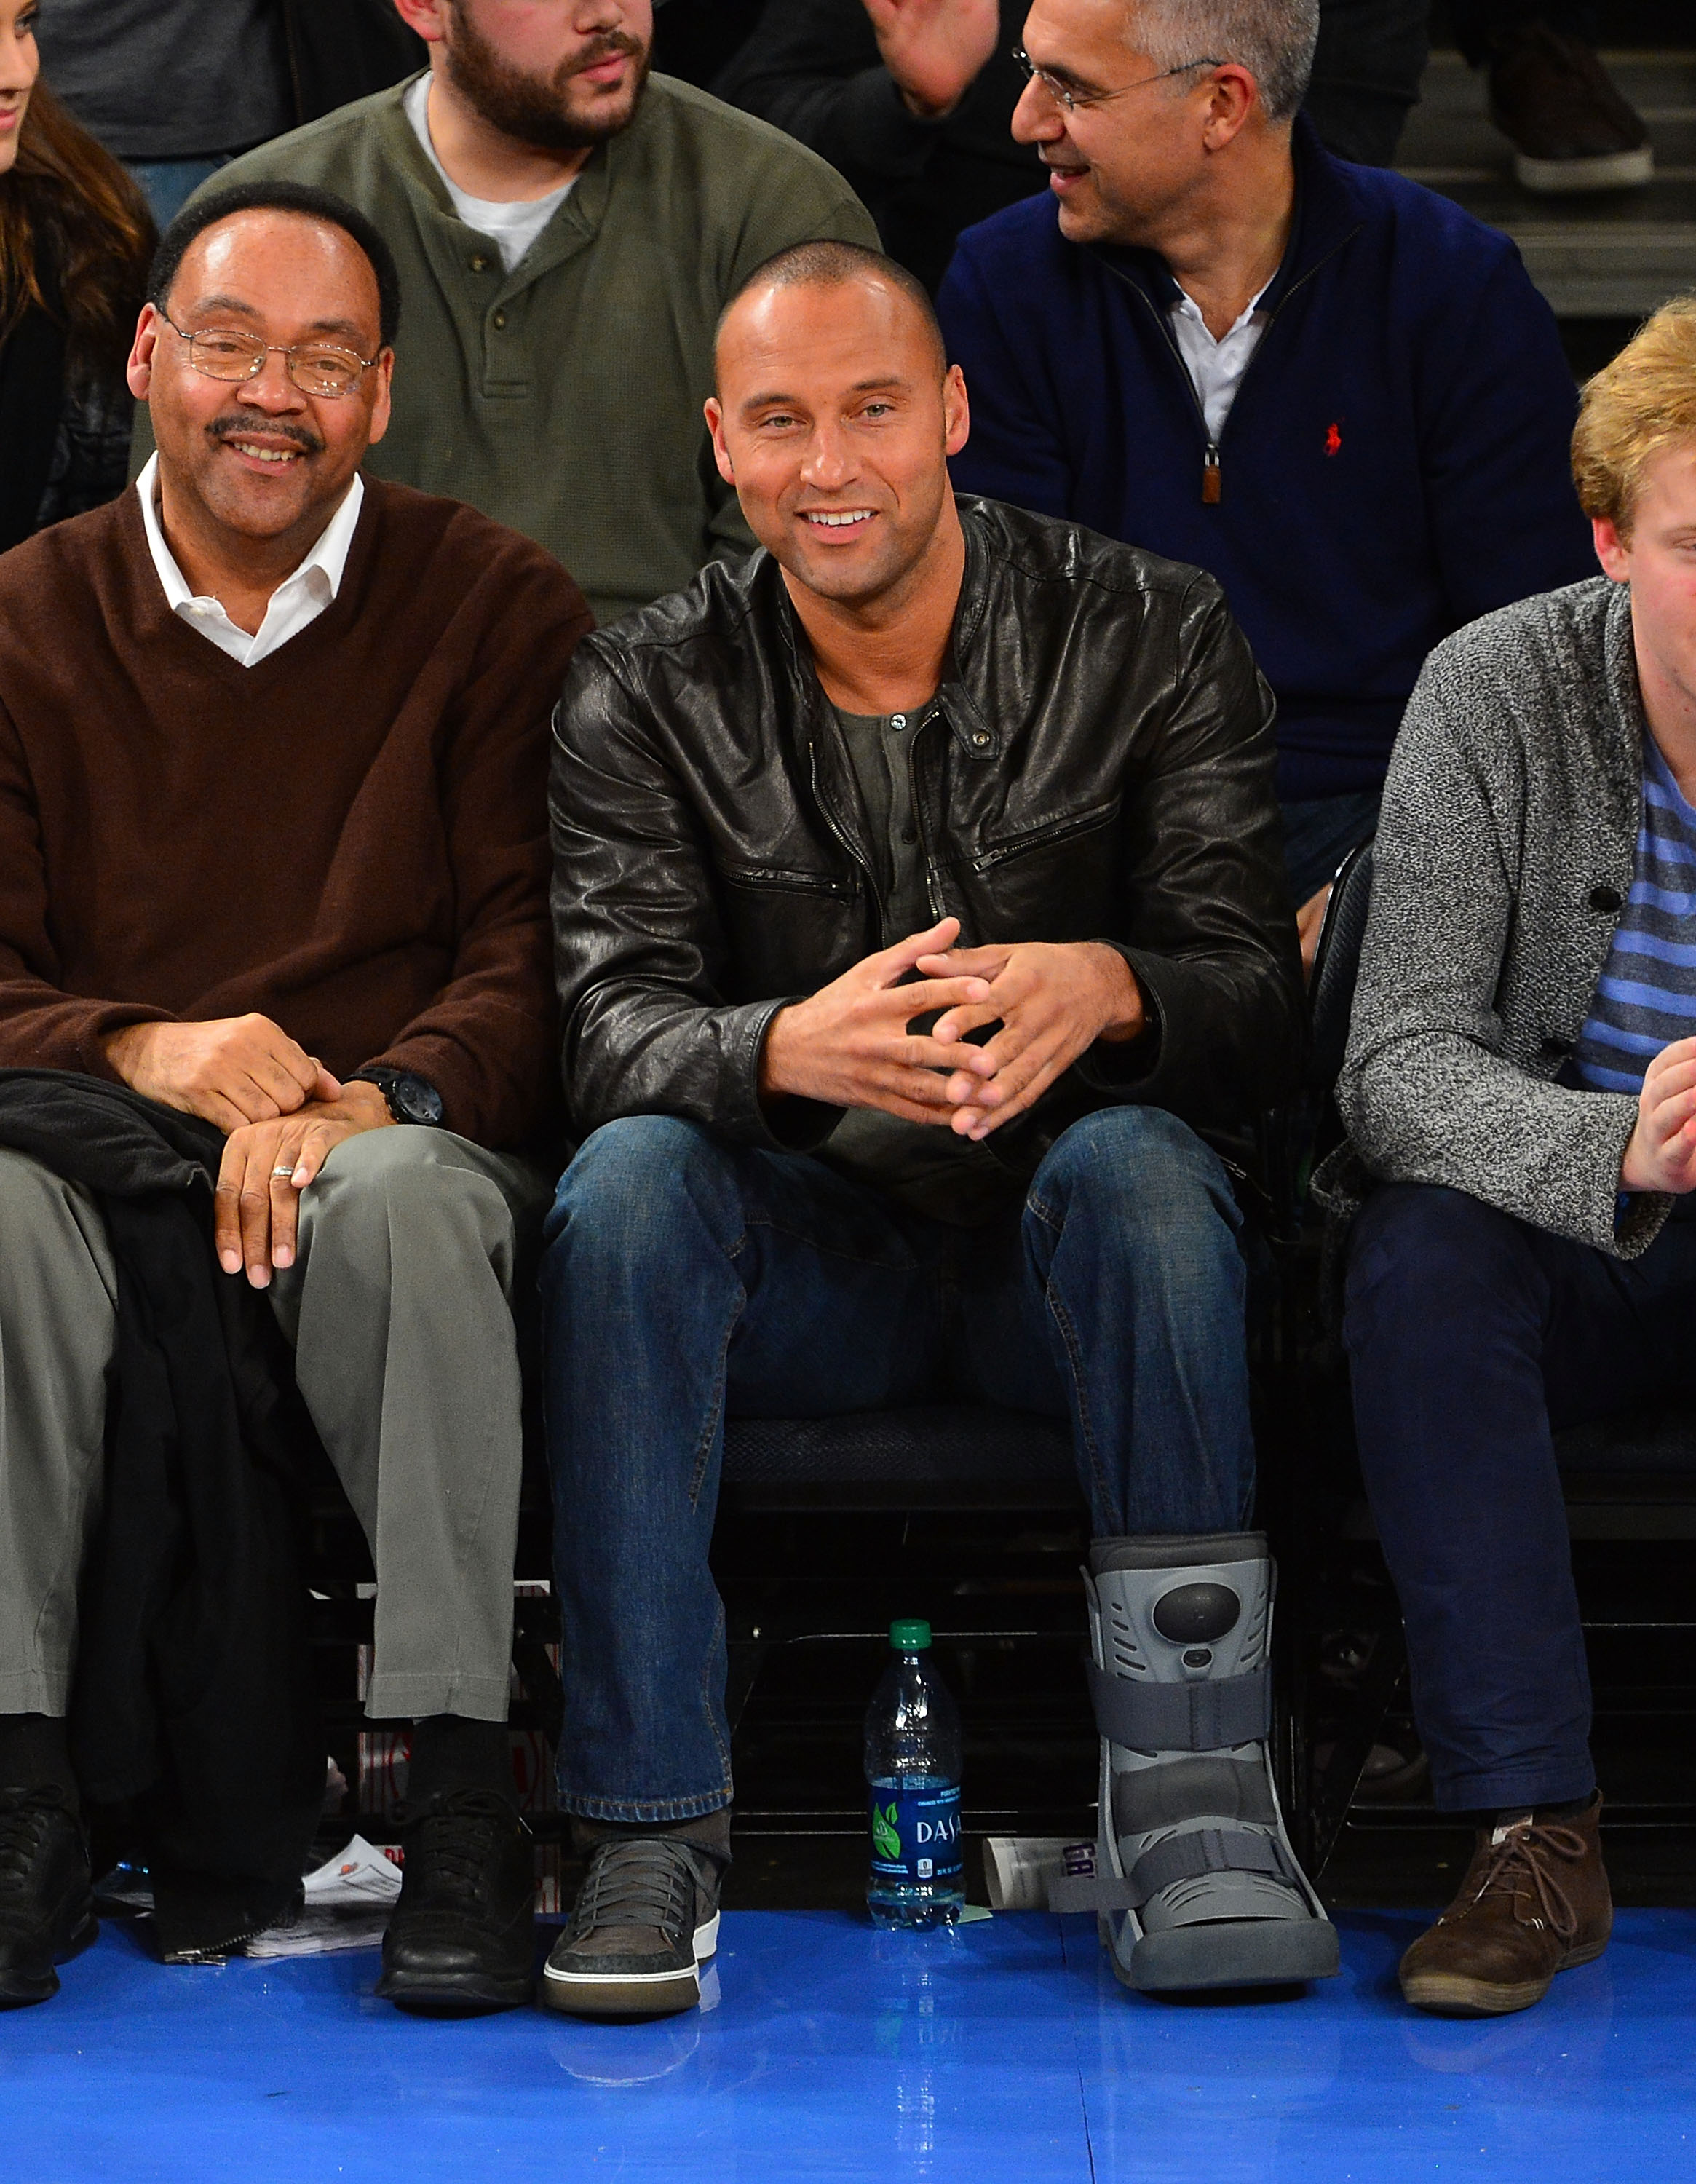 Derek Jeter and his father Charles Jeter attend the Minnesota Timberwolves vs New York Knicks game at Madison Square Garden on December 23, 2012, in New York City. | Source: Getty Images